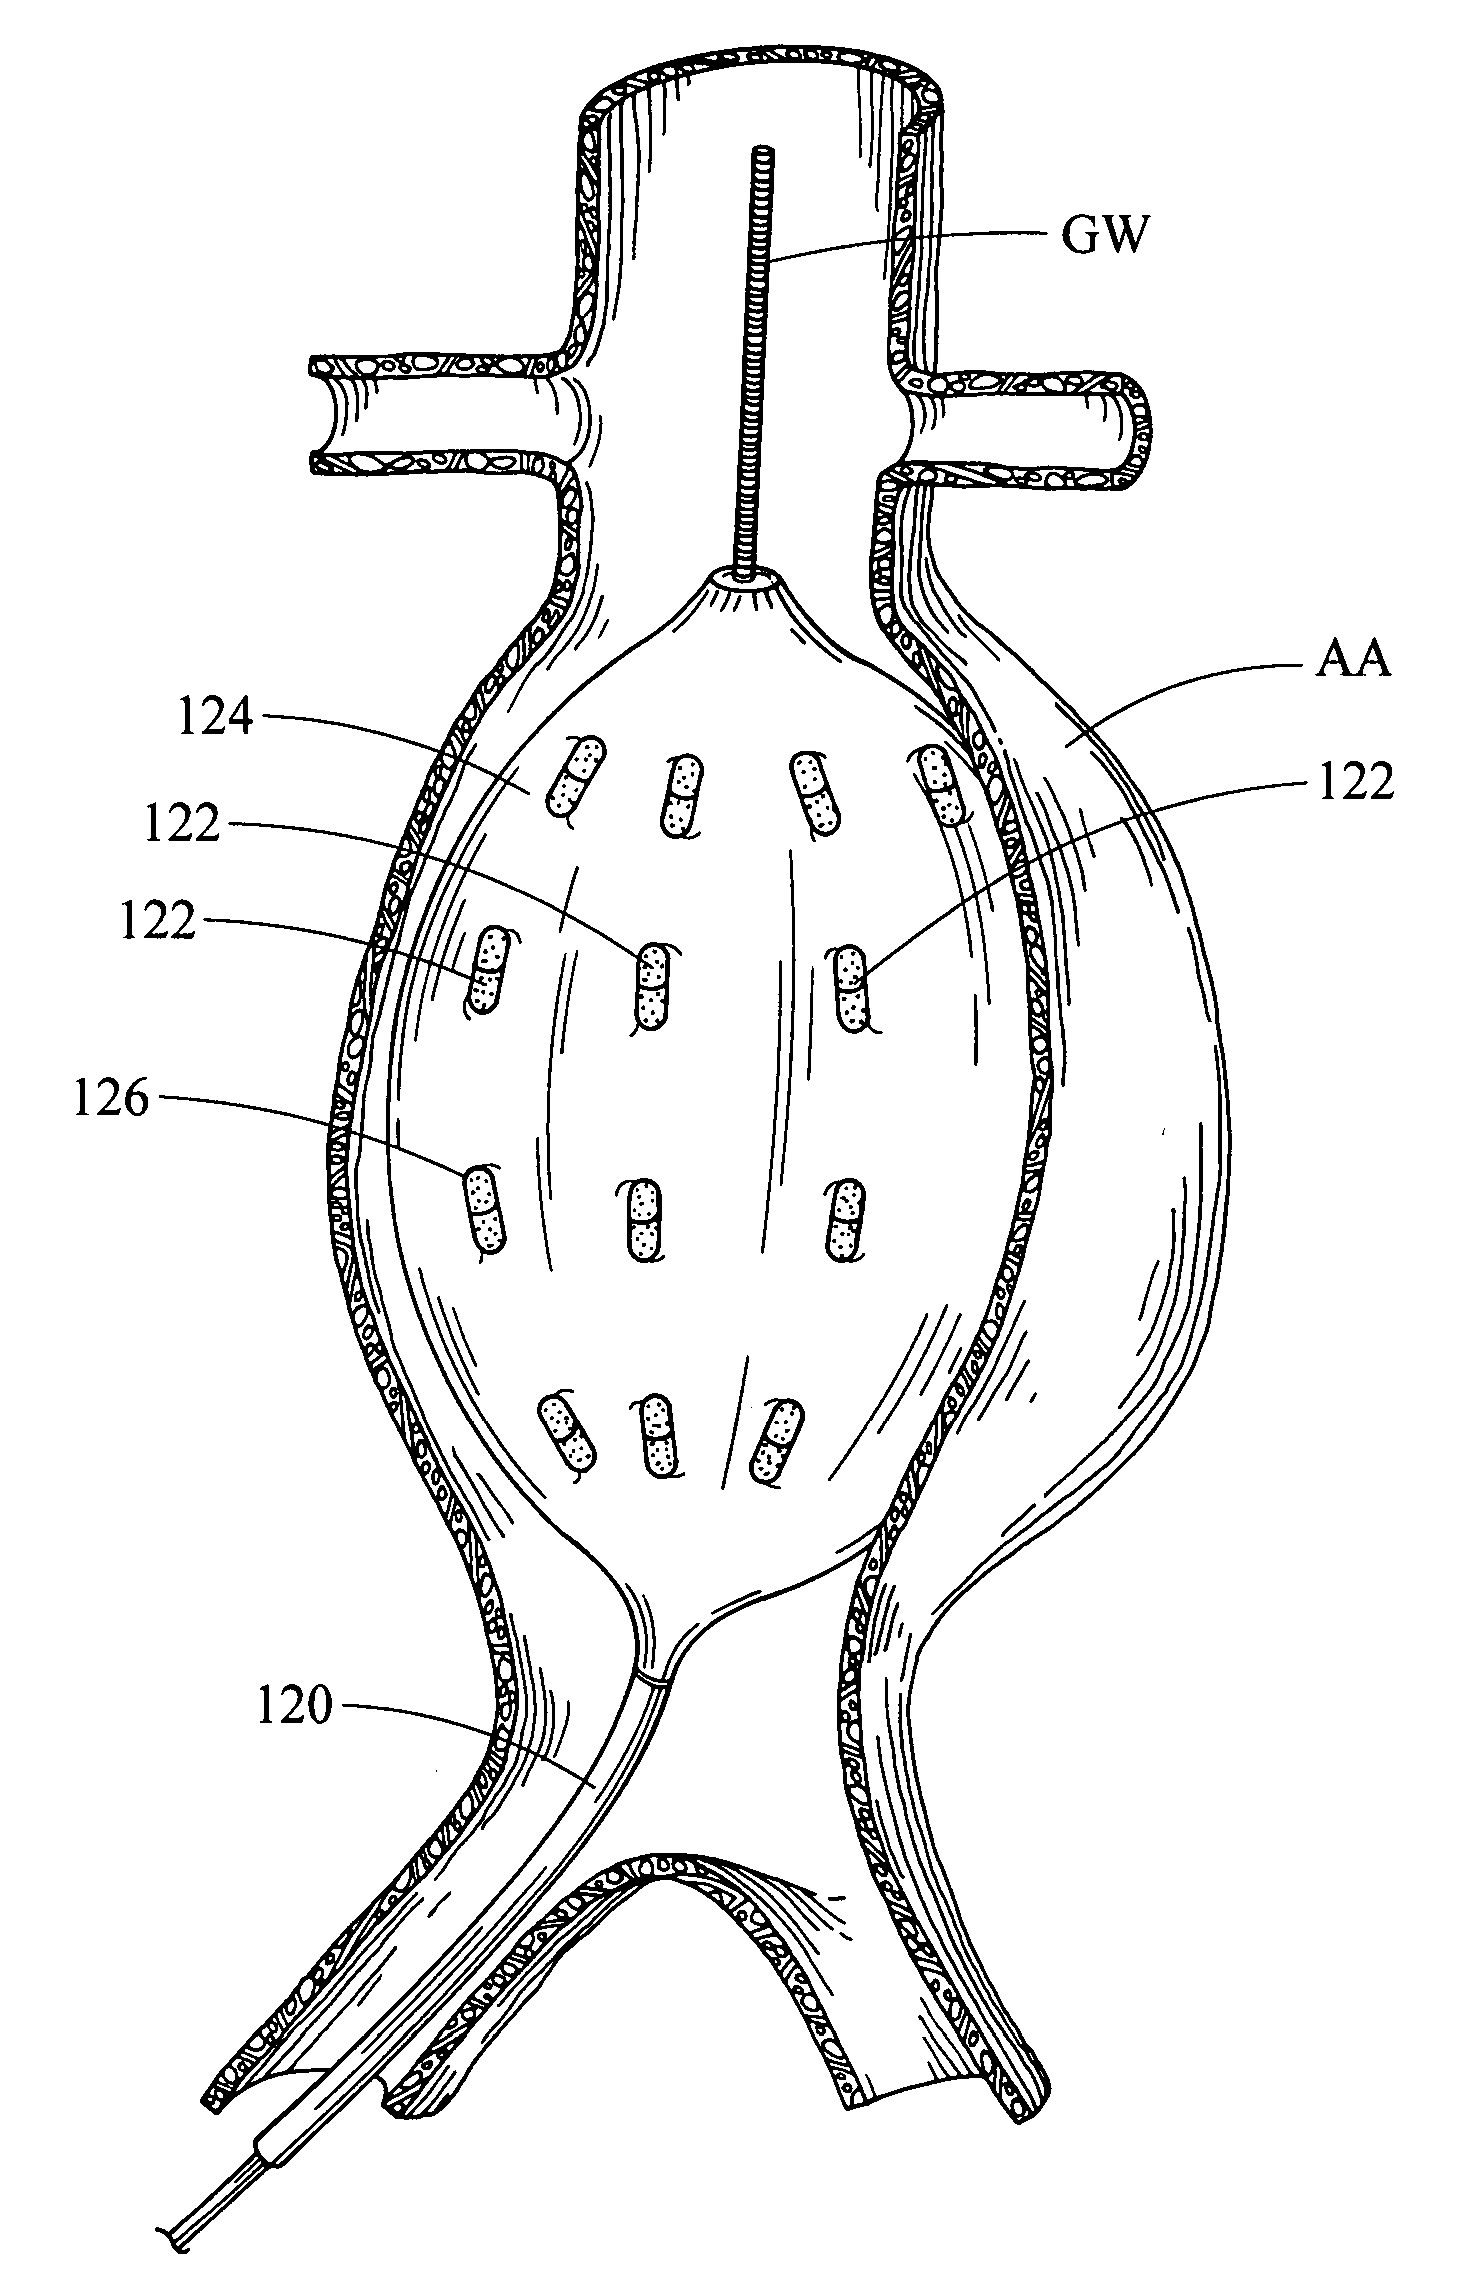 Endoluminal medical device for local delivery of cathepsin inhibitors, method of making and treating